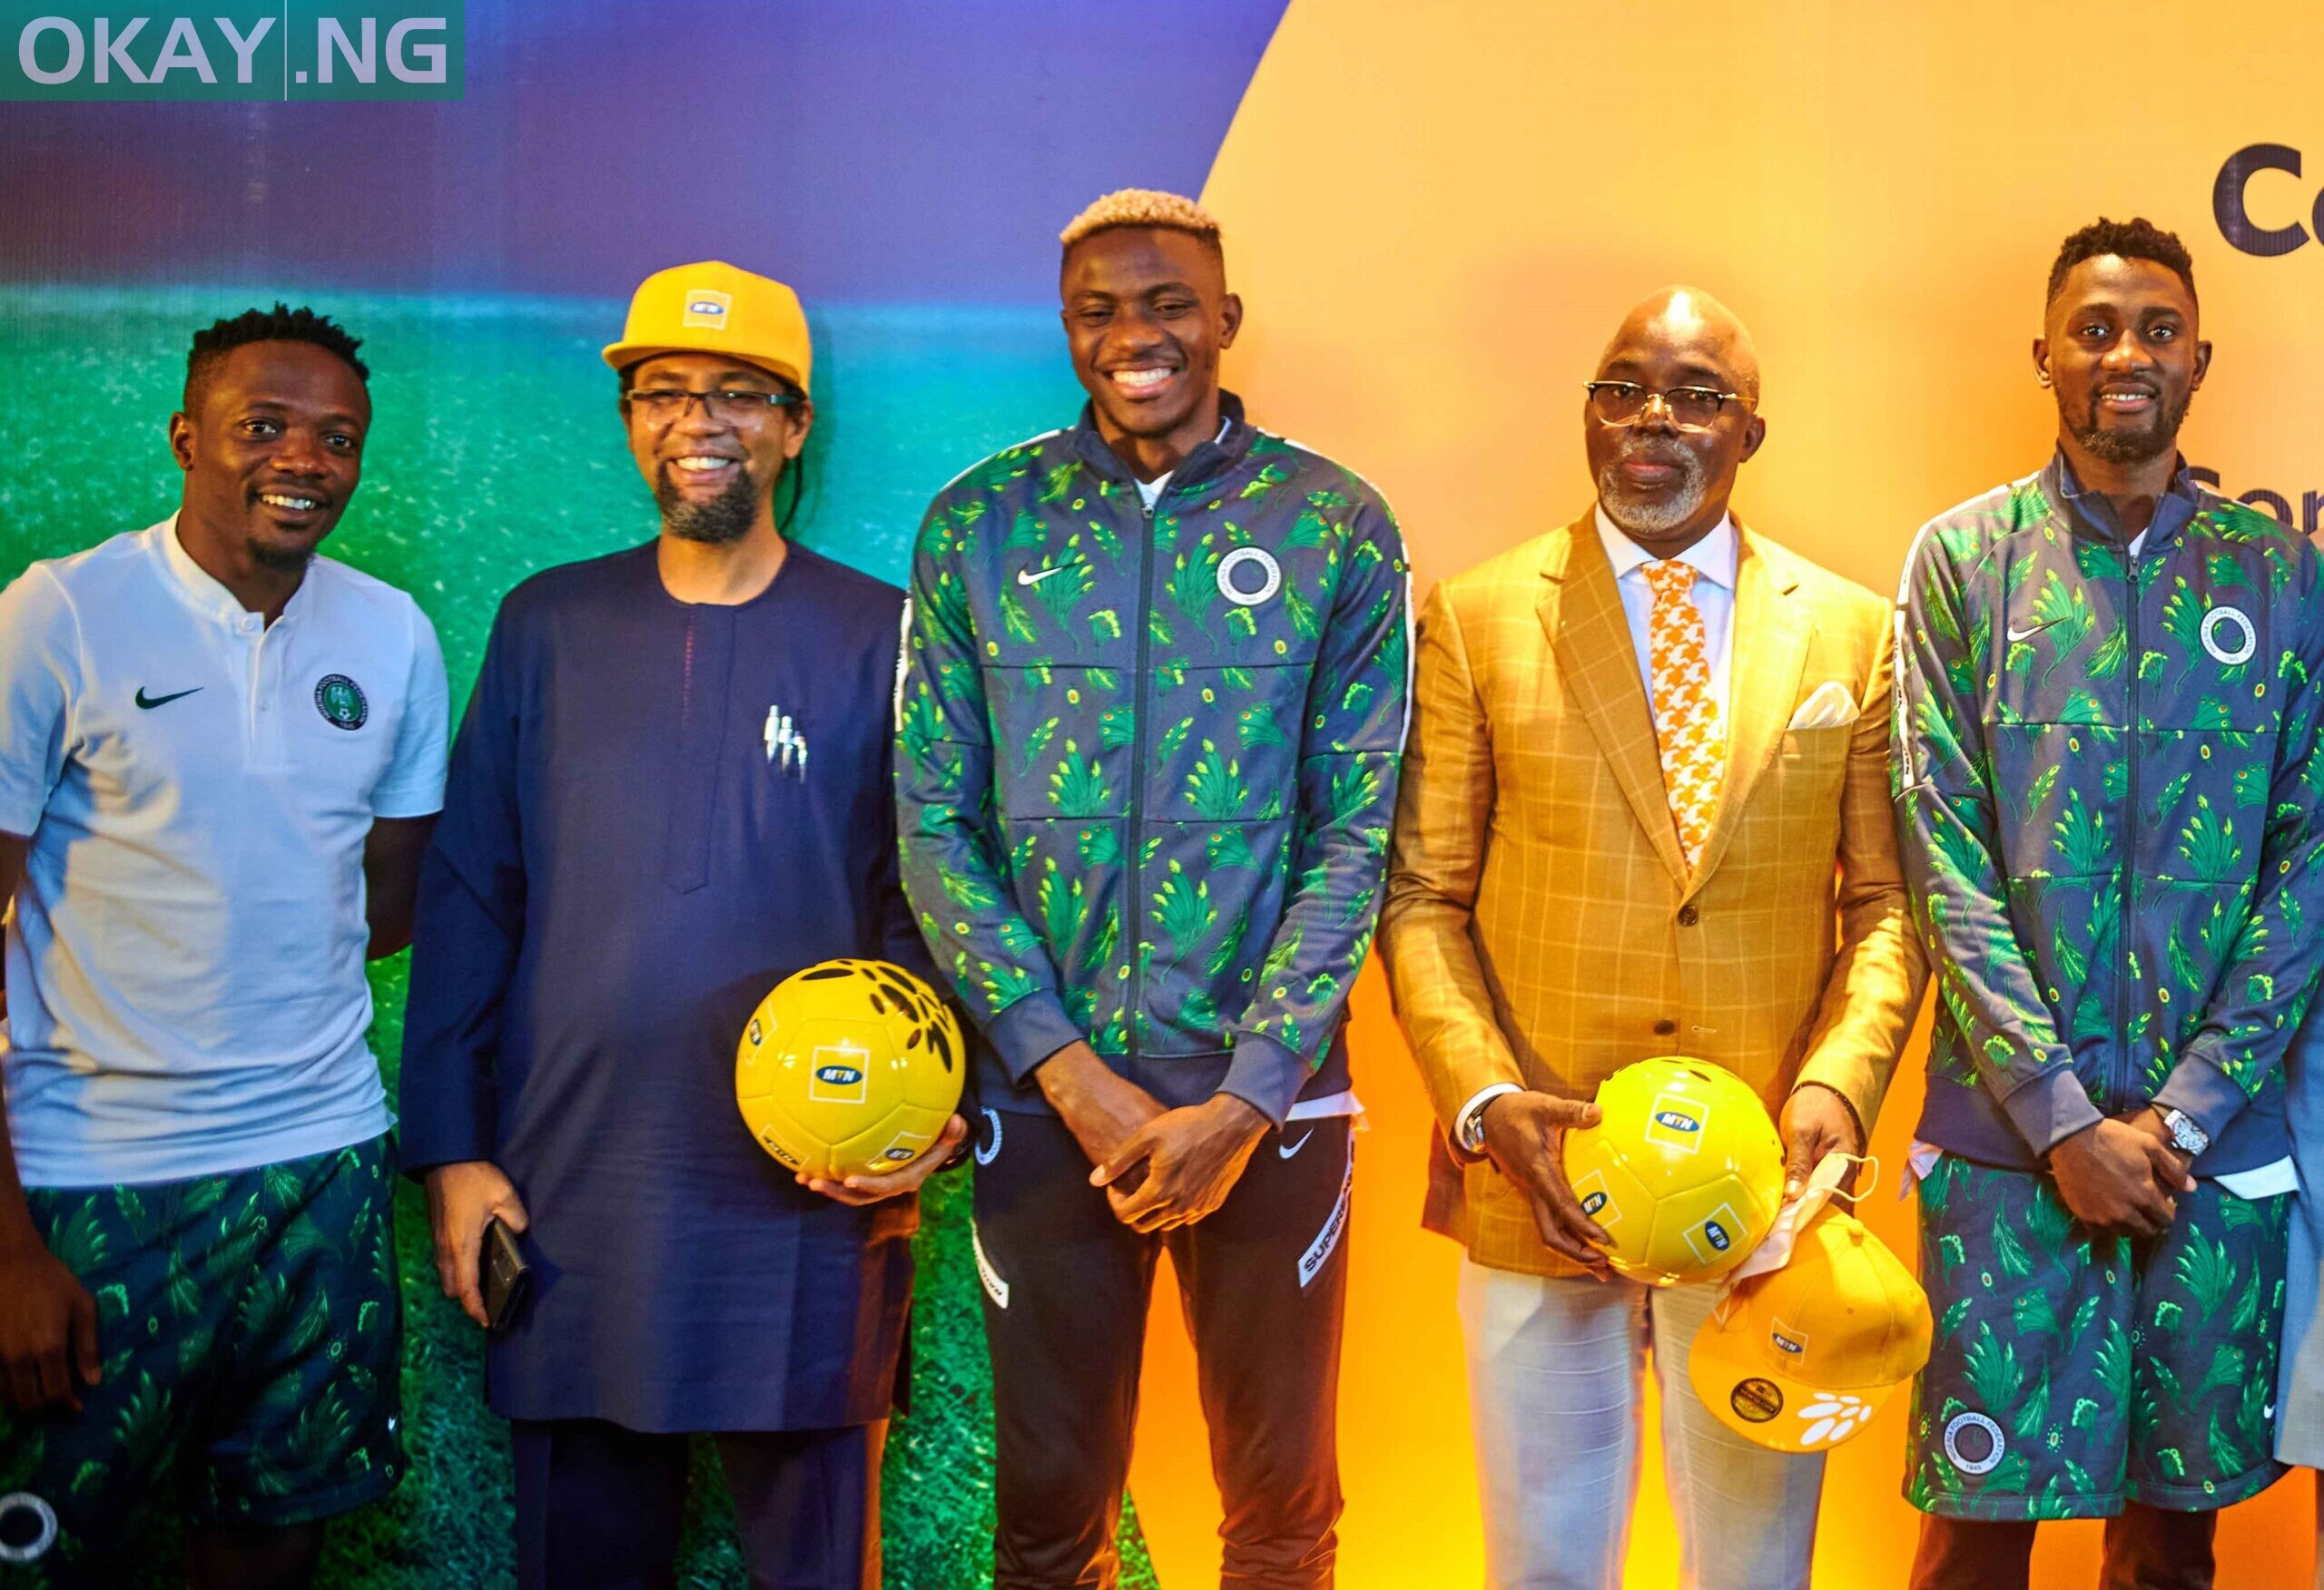 L-R: Super Eagles Captain, Ahmed Musa; Olutokun Toriola, CEO MTN Nigeria; Super Eagles player, Victor Oshimhen; President of the Nigerian Football Federation, Amaju Pinnick and Super Eagles player, Wilfred Ndidi at the partnership signing ceremony between MTN and the Nigerian Football Federation.